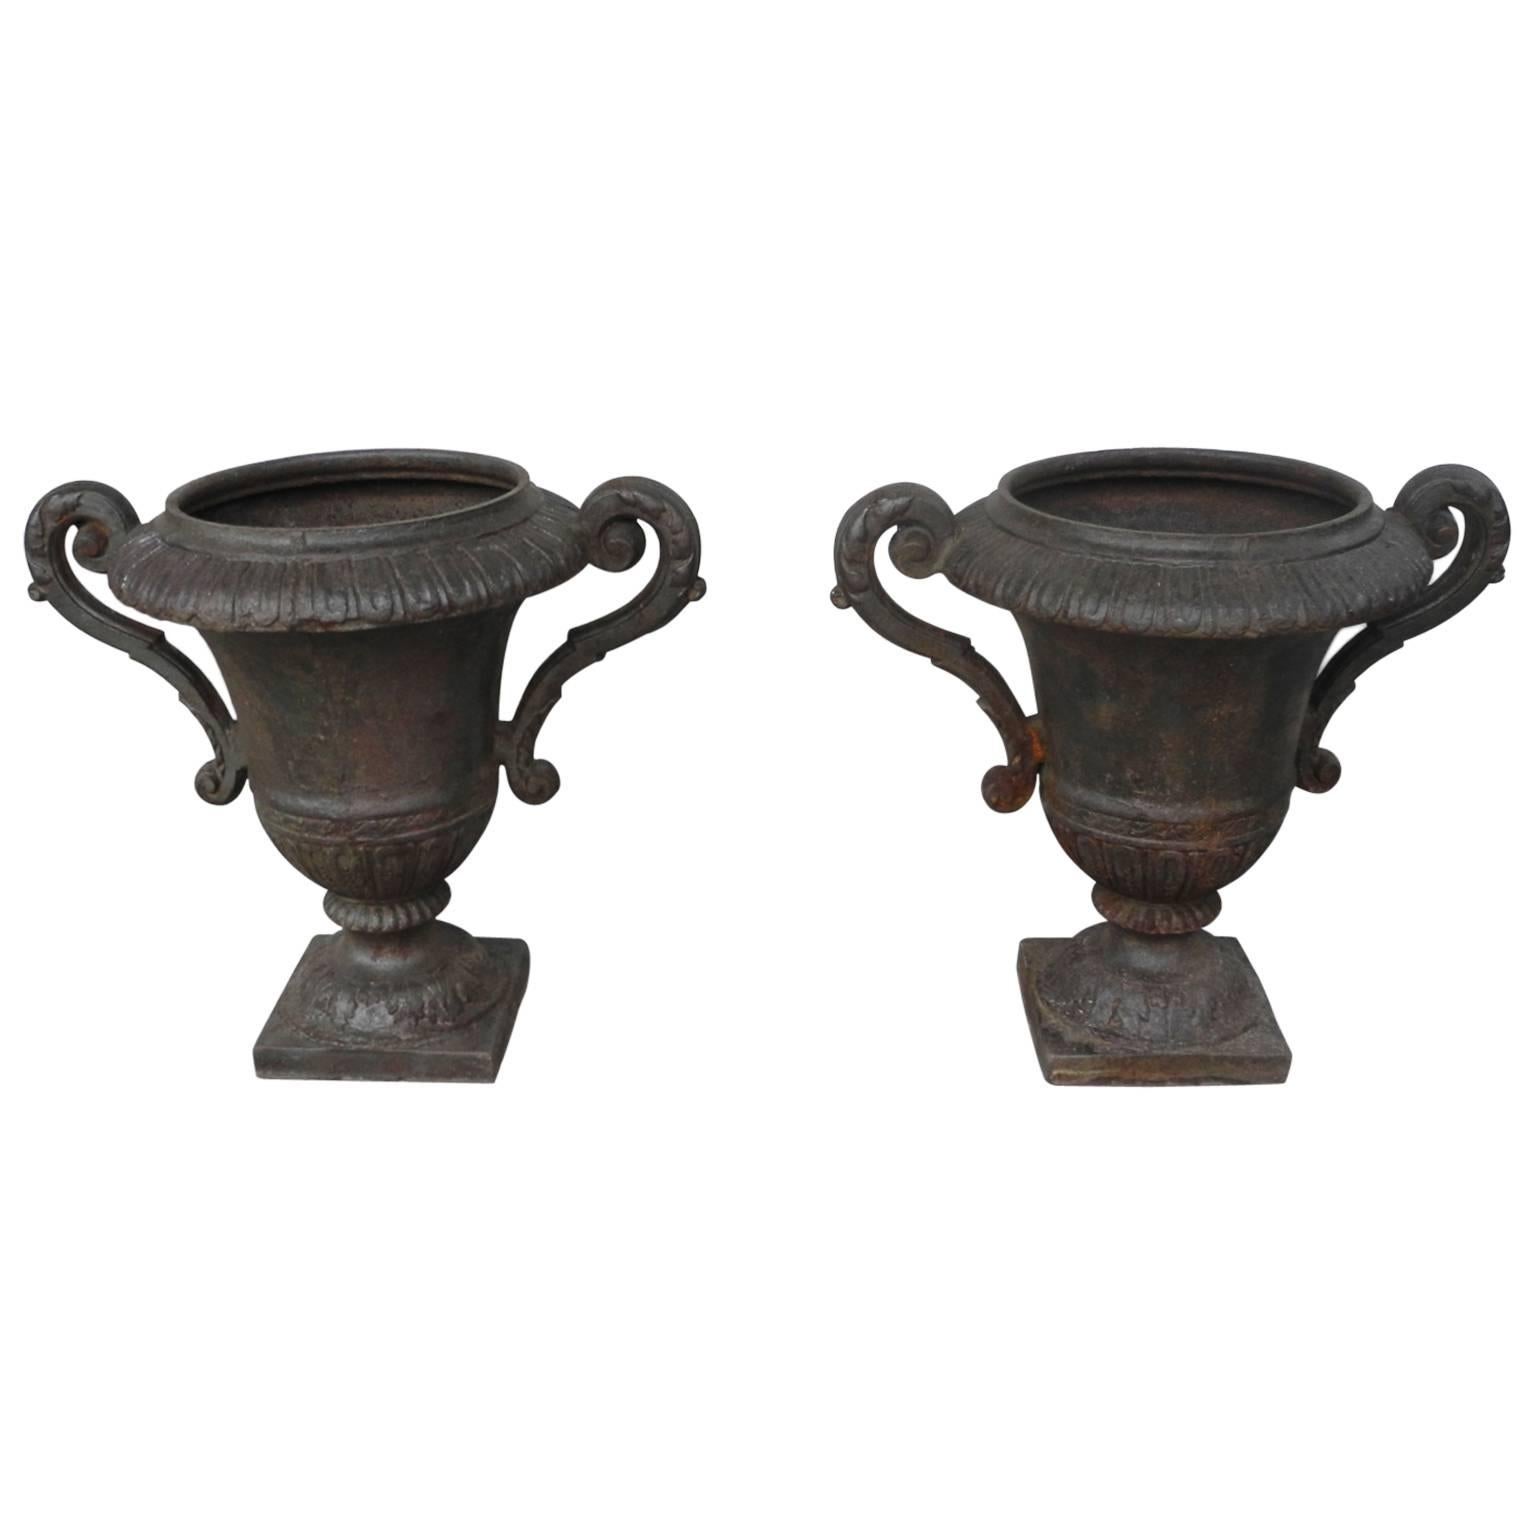 Pair of Antique Iron Urns with Detailing & Carved Arms from 19th Century France For Sale